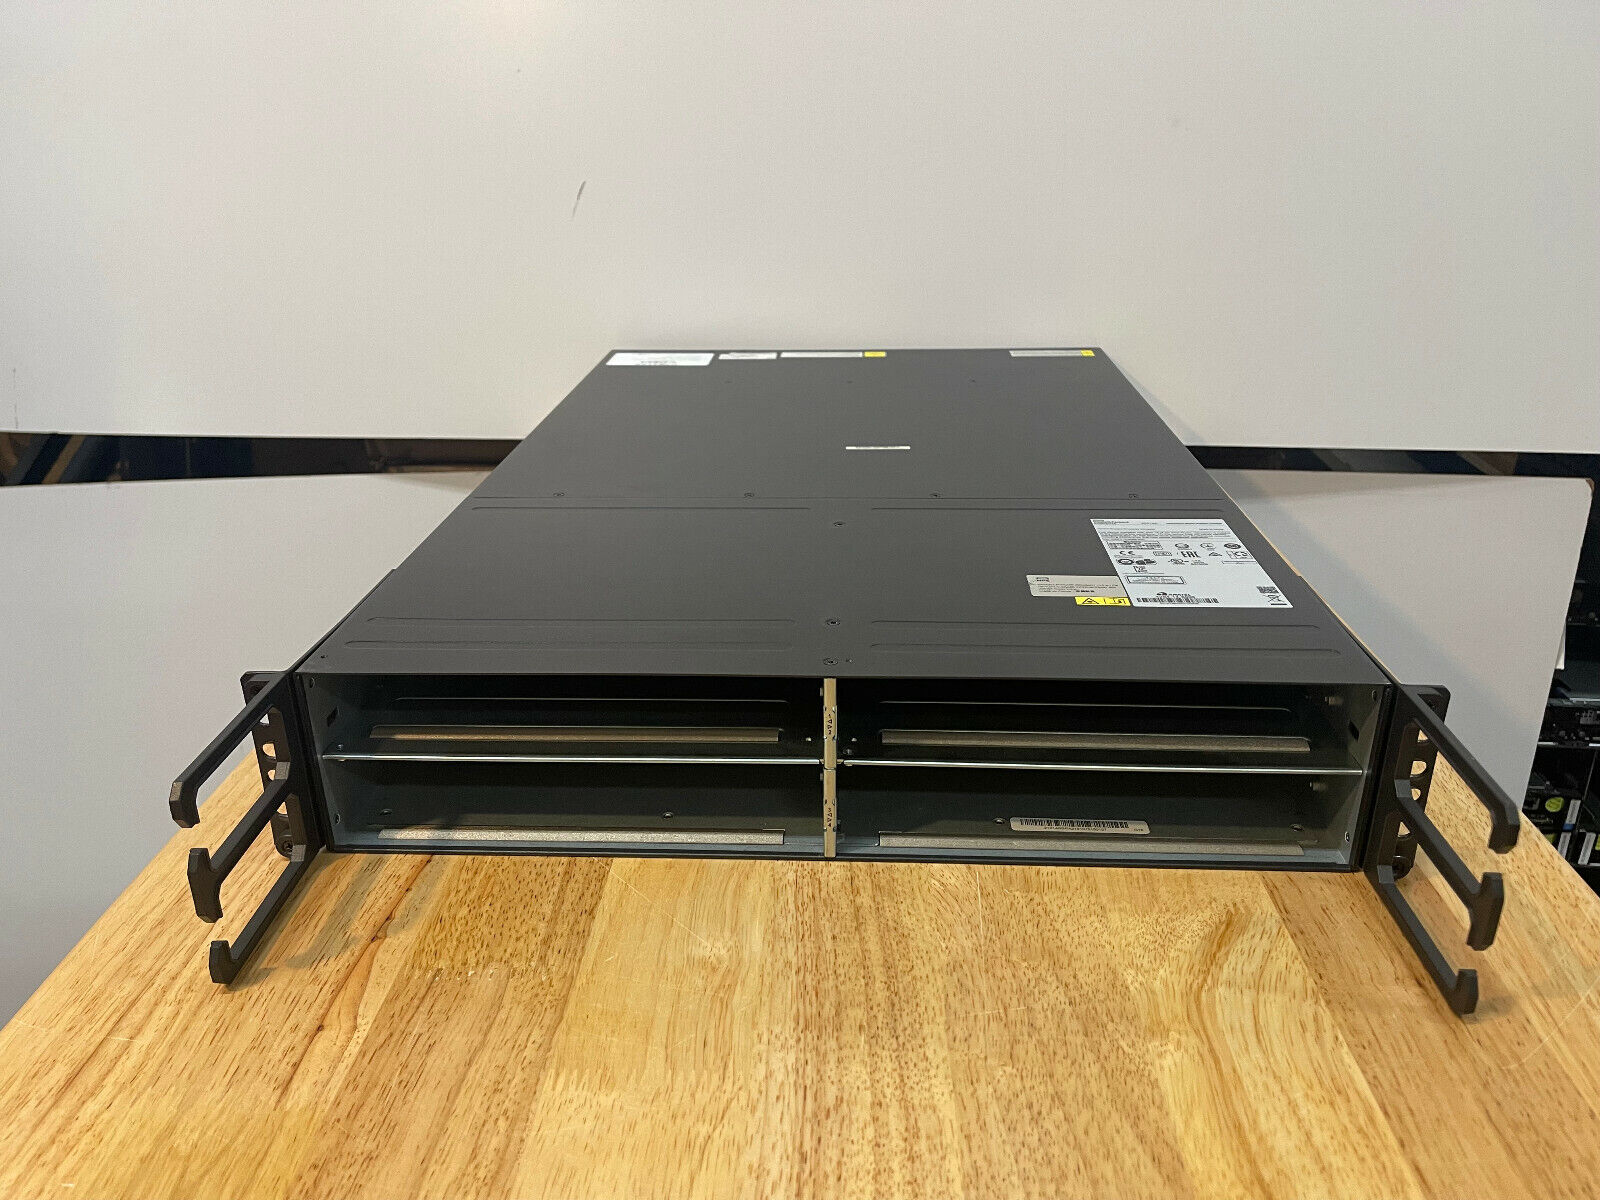 HPE JQ041A FlexFabric 5930 4-slot Switch Chassis up to 32x 40GE 96x 1/10GbE 4/8Gb FC L3.